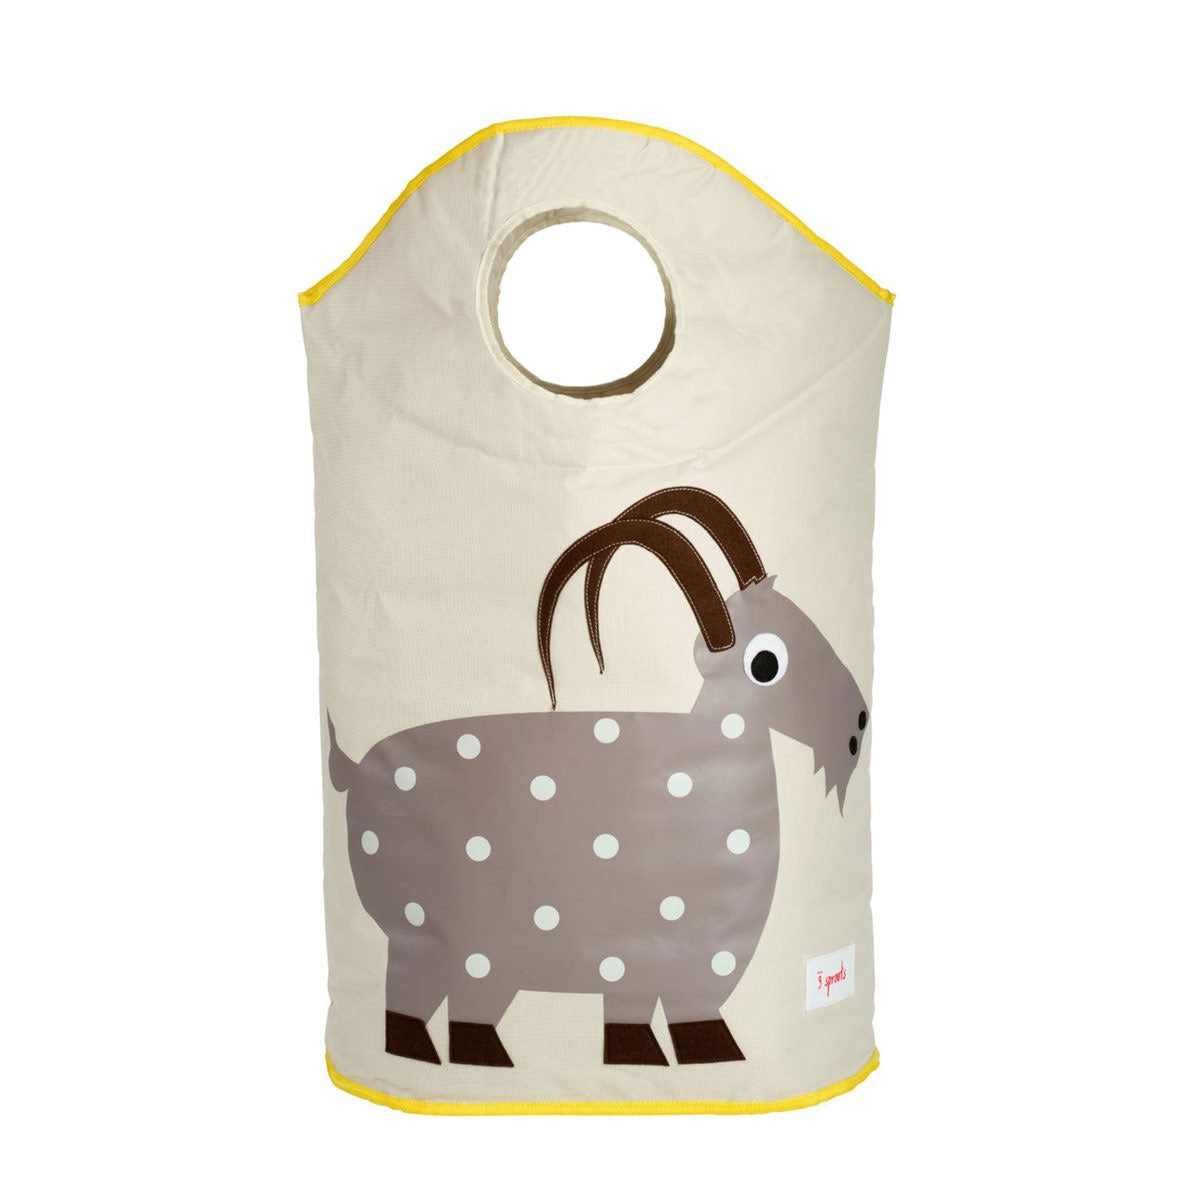 The 3 Sprouts laundry hamper is the perfect solution. Two large handles collapse, creating a circular opening that stylishly keeps dirty laundry out of sight.